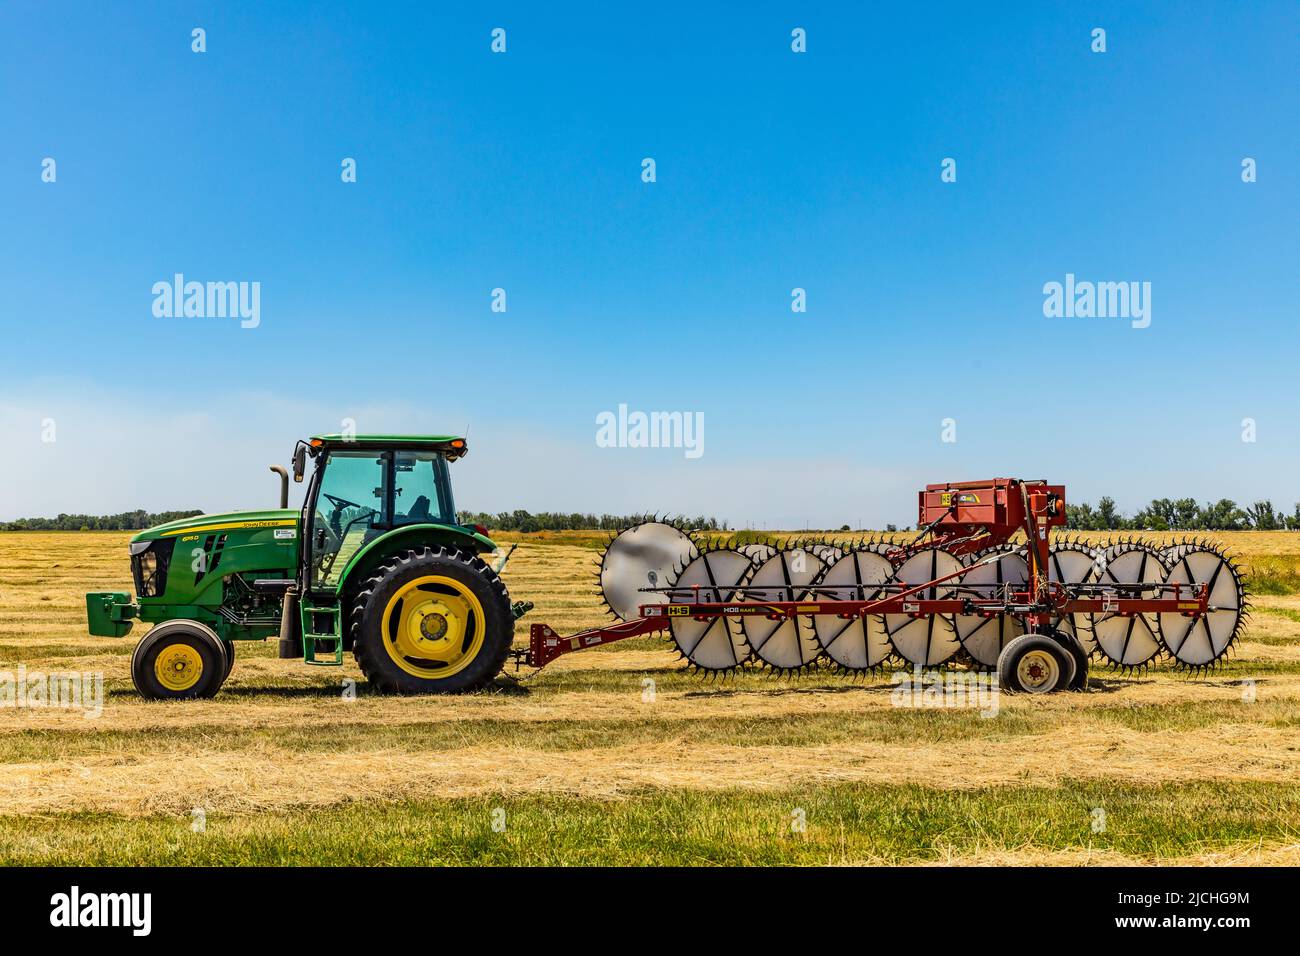 A John Deere tractor with a wheel rake attached in a field at the Merced National Wildlife refuge in the Central Valley of California USA Stock Photo